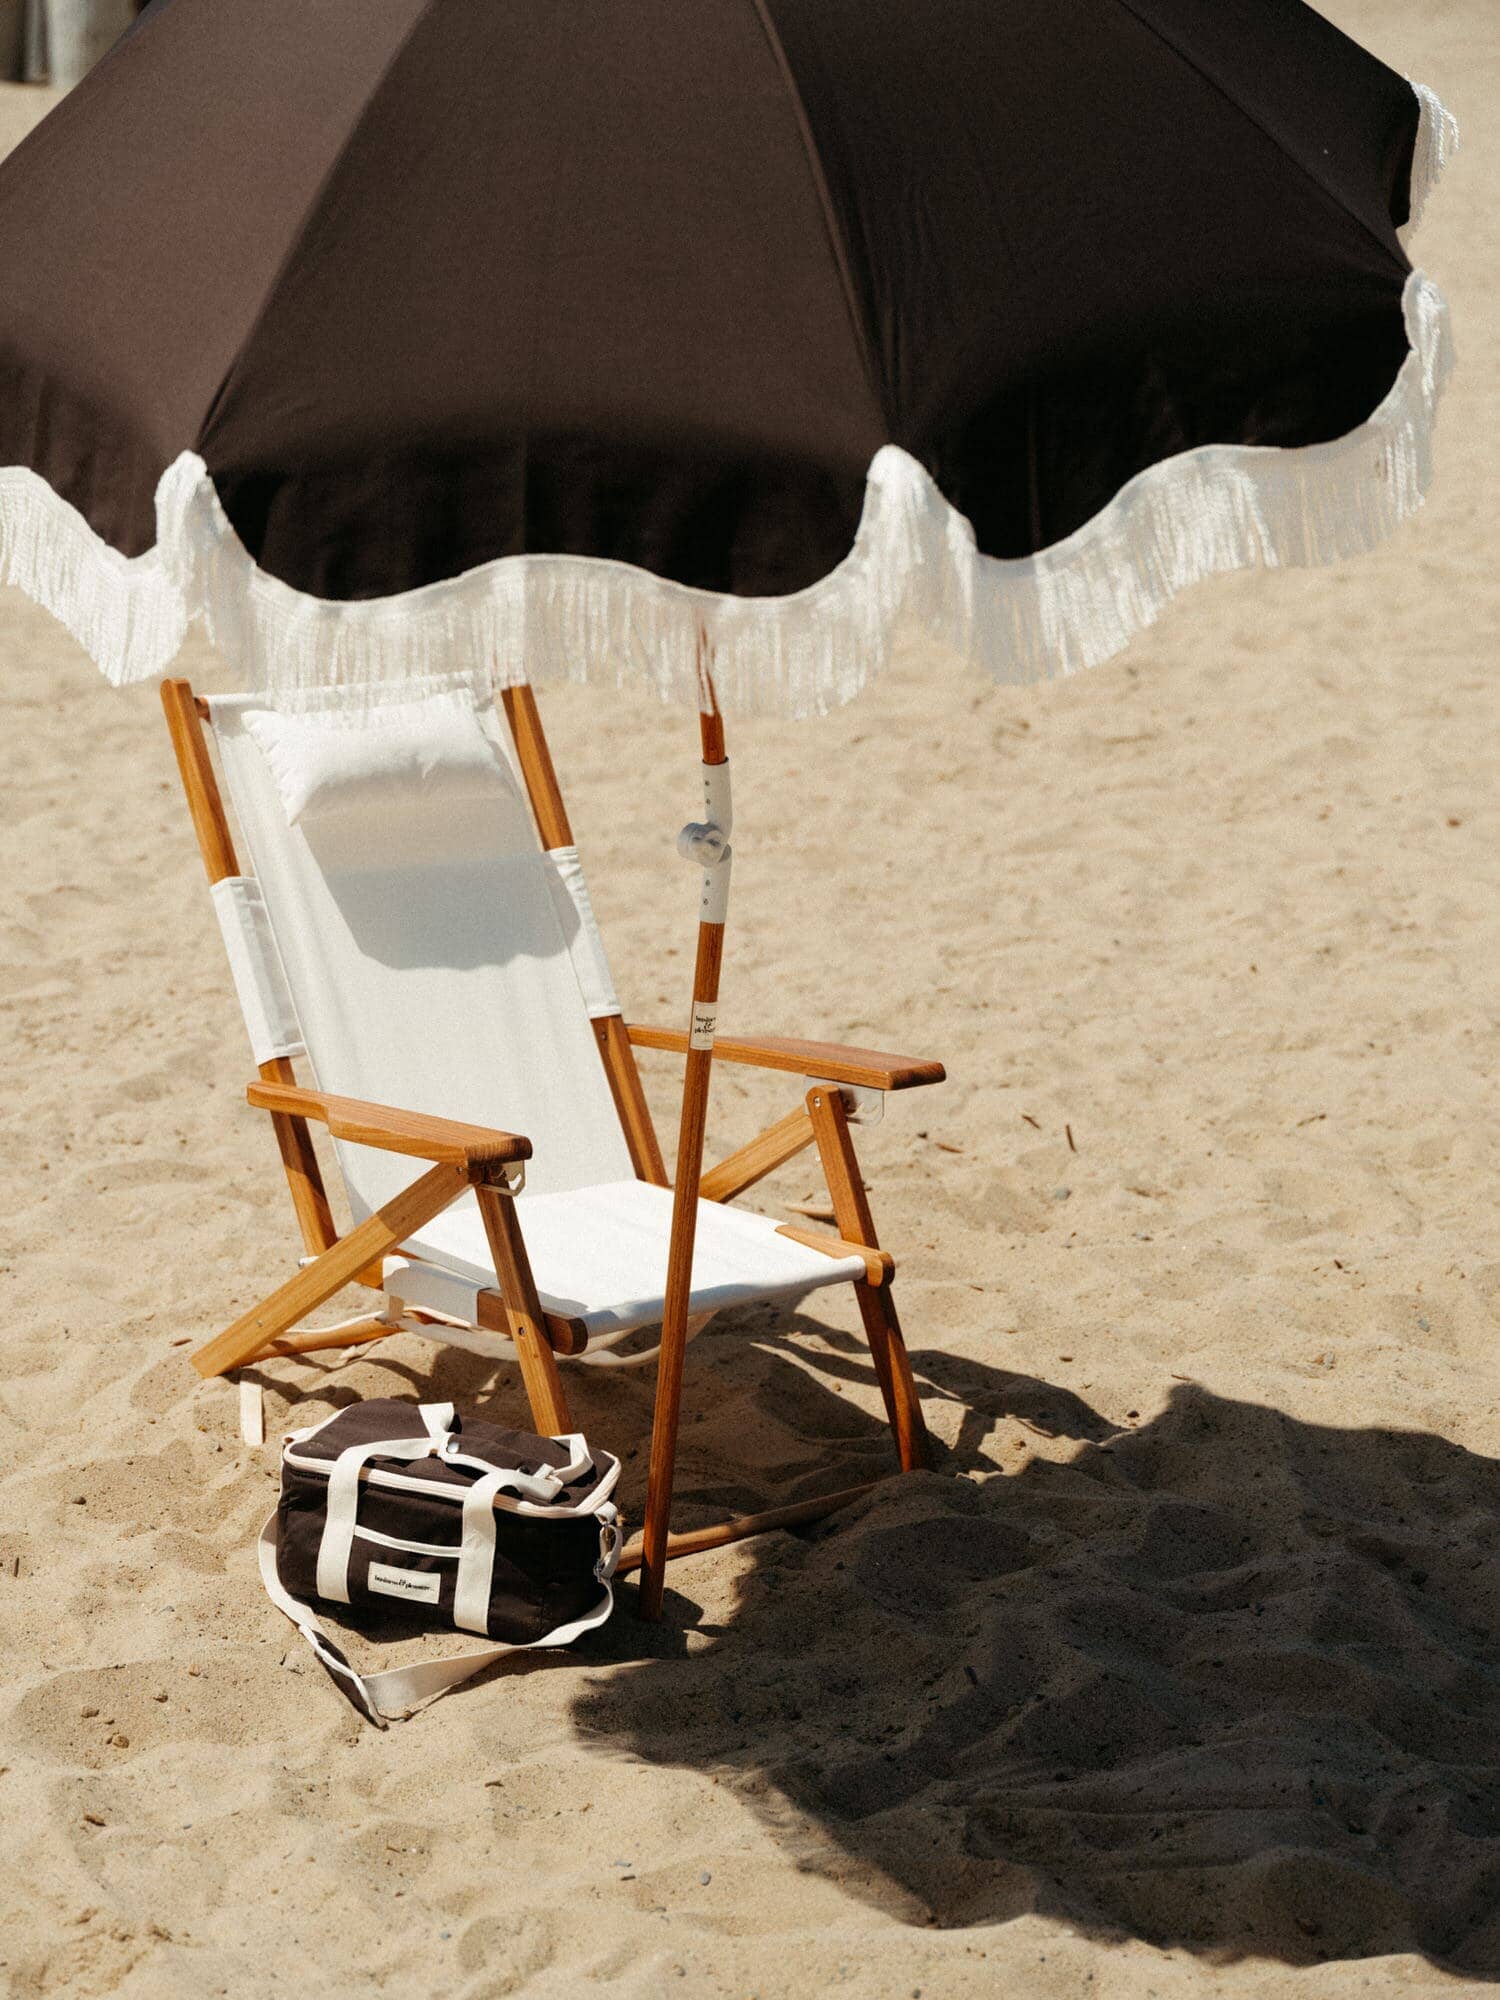 Vintage black holiday cooler, umbrella and white chair on the beach